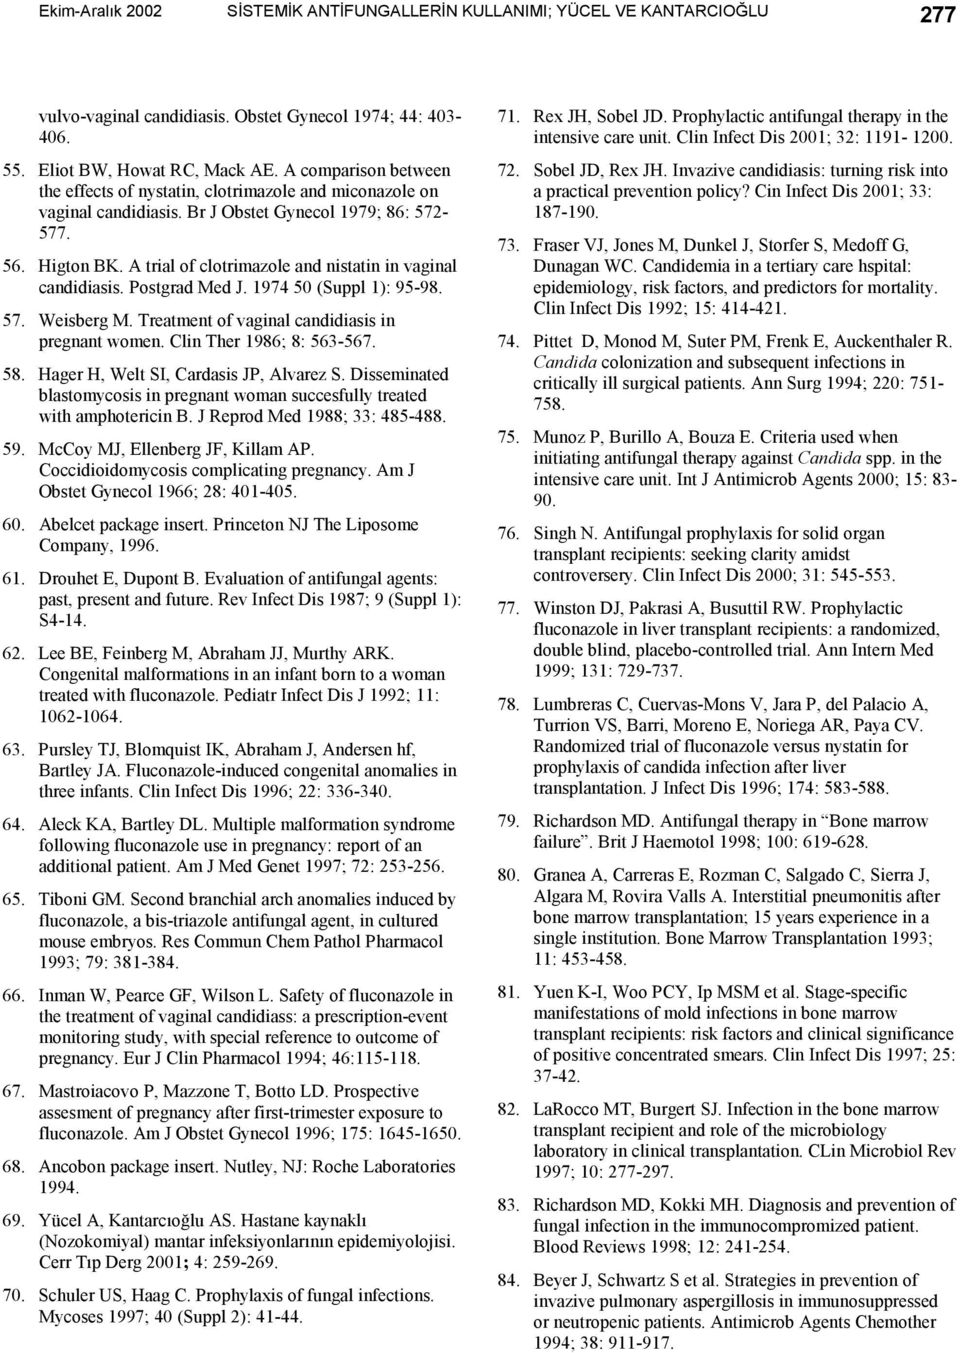 A trial of clotrimazole and nistatin in vaginal candidiasis. Postgrad Med J. 1974 50 (Suppl 1): 95-98. 57. Weisberg M. Treatment of vaginal candidiasis in pregnant women. Clin Ther 1986; 8: 563-567.